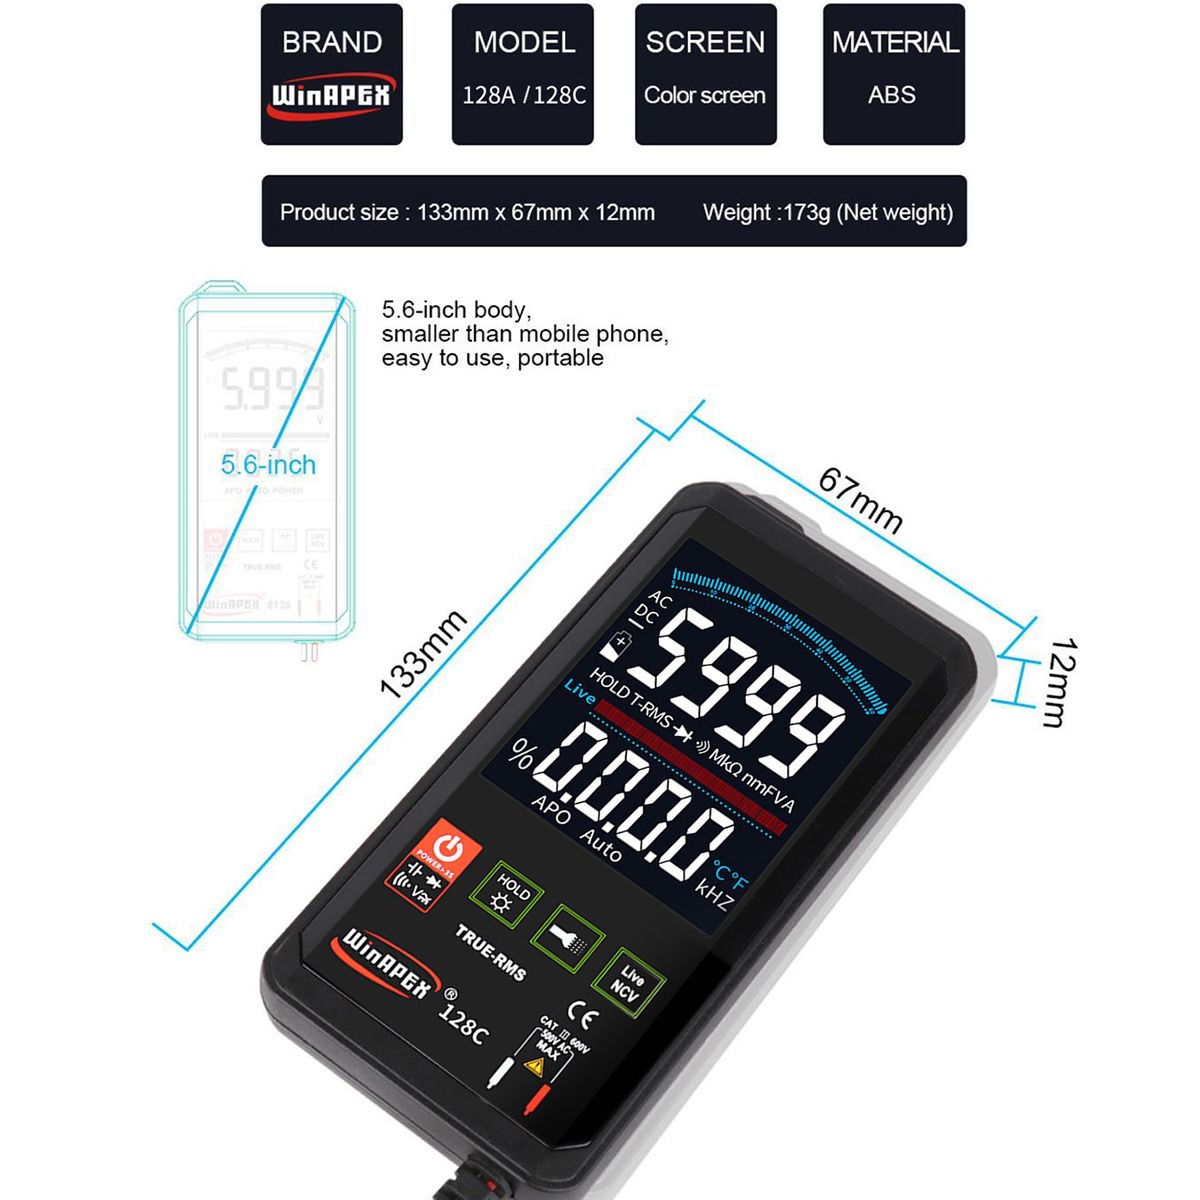 Touch-LCD-Digital-Multimeter-RMS-Auto-Tester-Transistor-AC-DC-Voltmeter-Ohmmeter-1712075